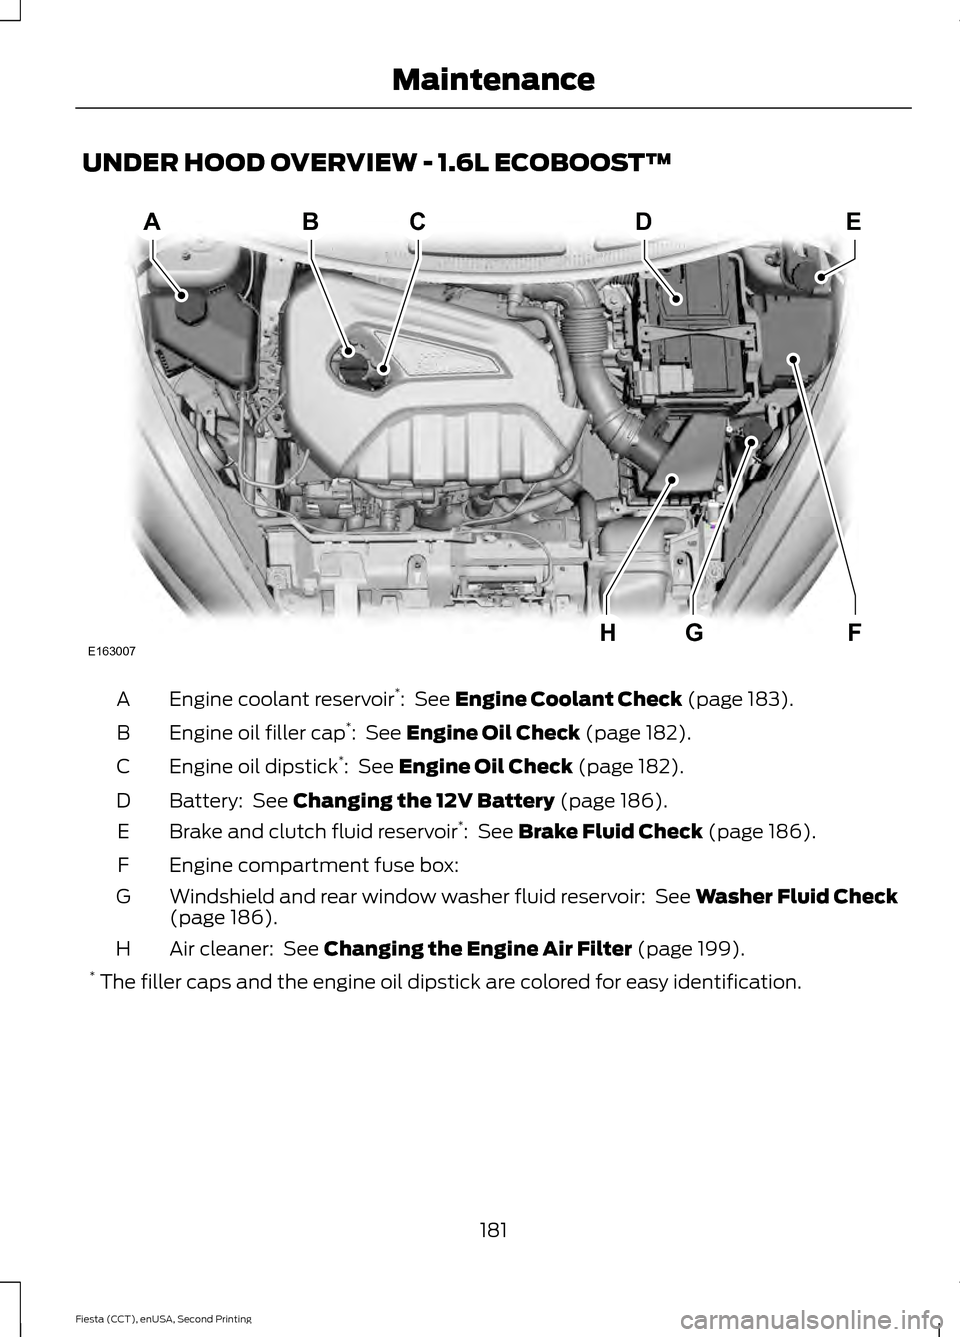 FORD FIESTA 2015 6.G User Guide UNDER HOOD OVERVIEW - 1.6L ECOBOOST™
Engine coolant reservoir
*
:  See Engine Coolant Check (page 183).
A
Engine oil filler cap *
: 
 See Engine Oil Check (page 182).
B
Engine oil dipstick *
: 
 See